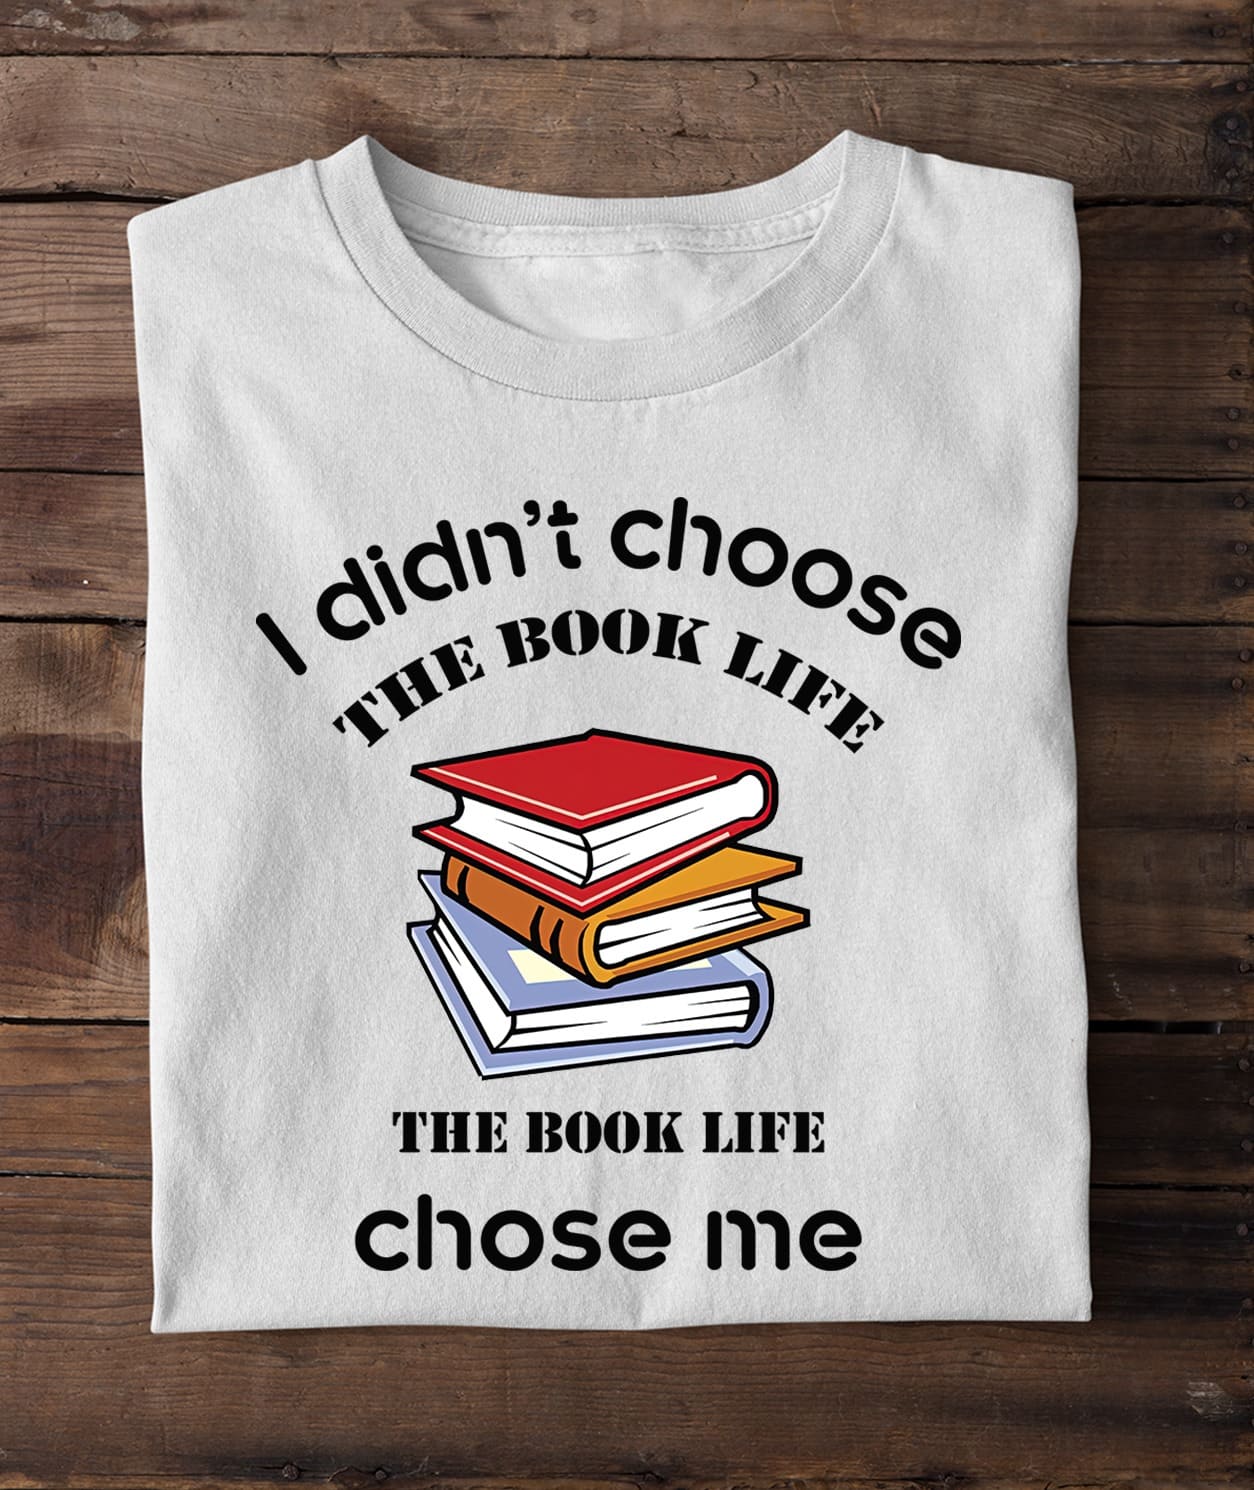 Books Graphic T-shirt - I didn't choose the book life the book life chose me